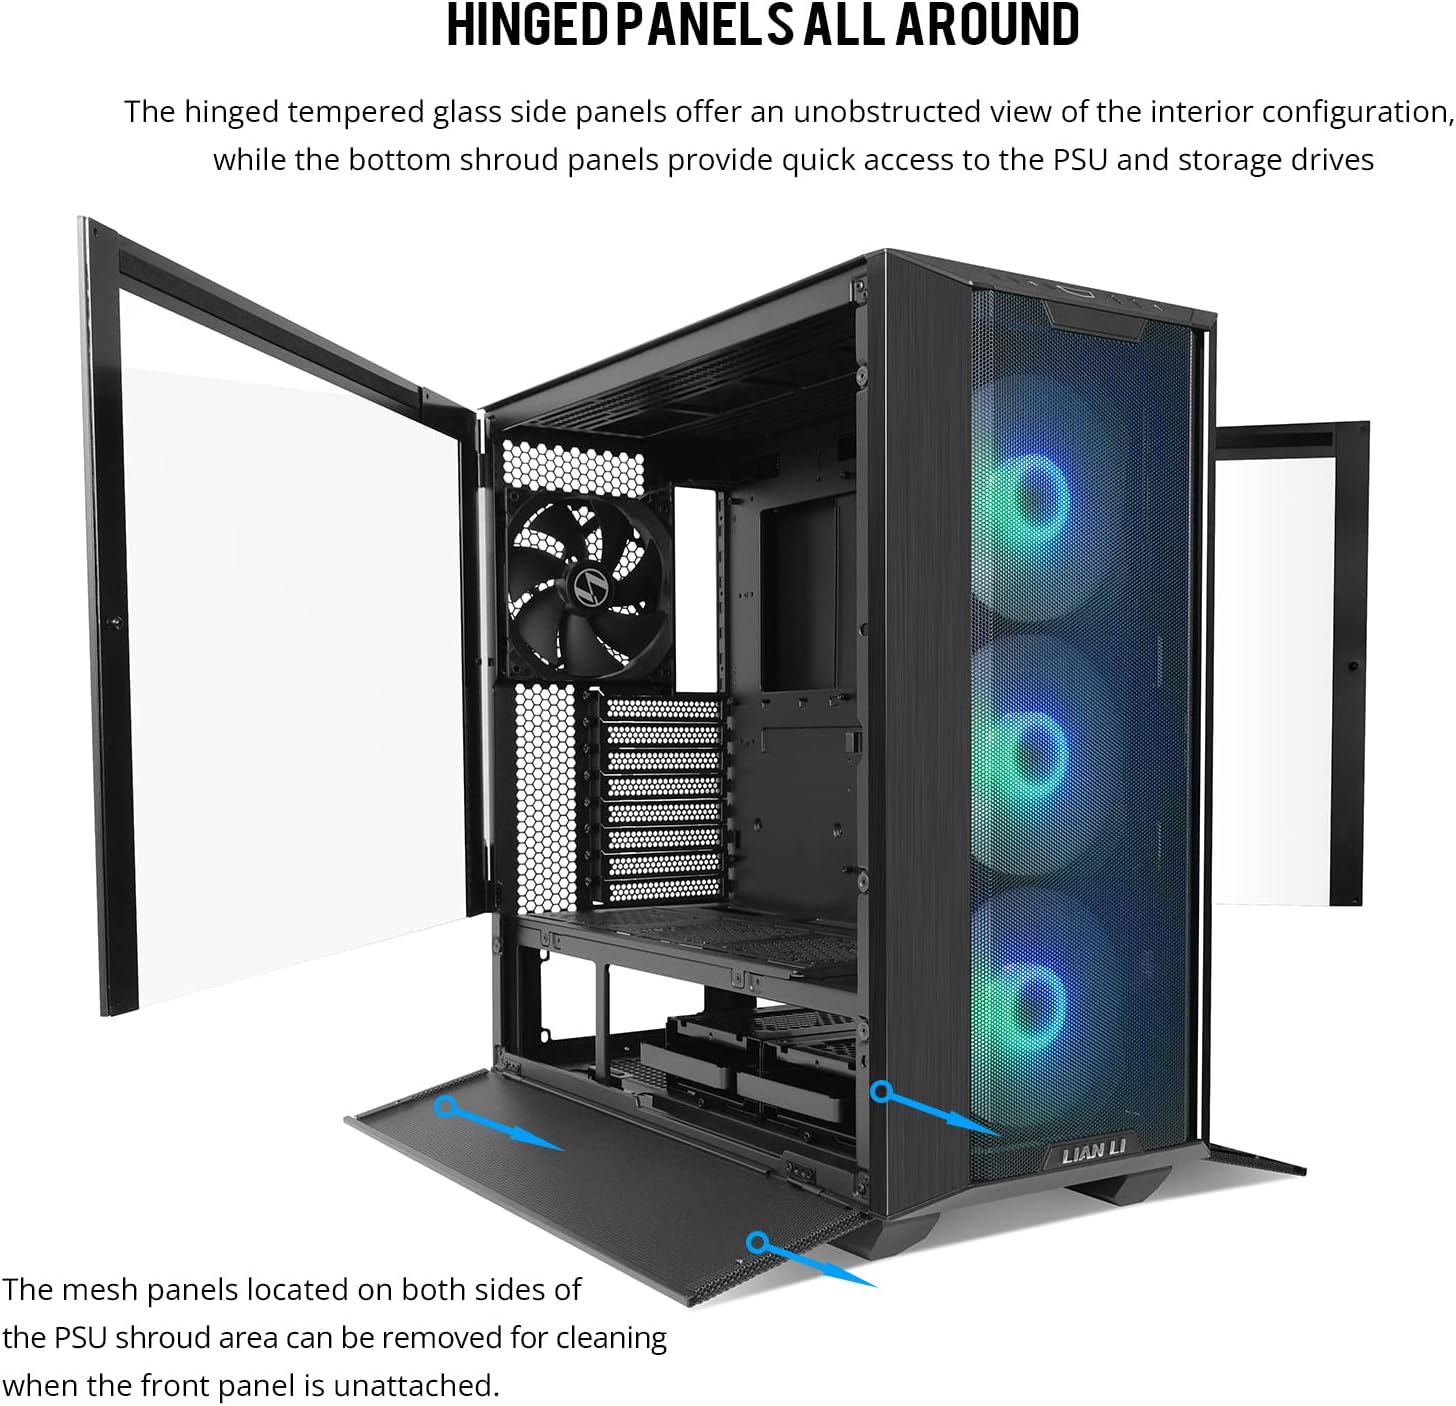 LANCOOL III E-ATX PC Case for gaming enthusiasts - ample room for large GPU and cooling support 0840353042674